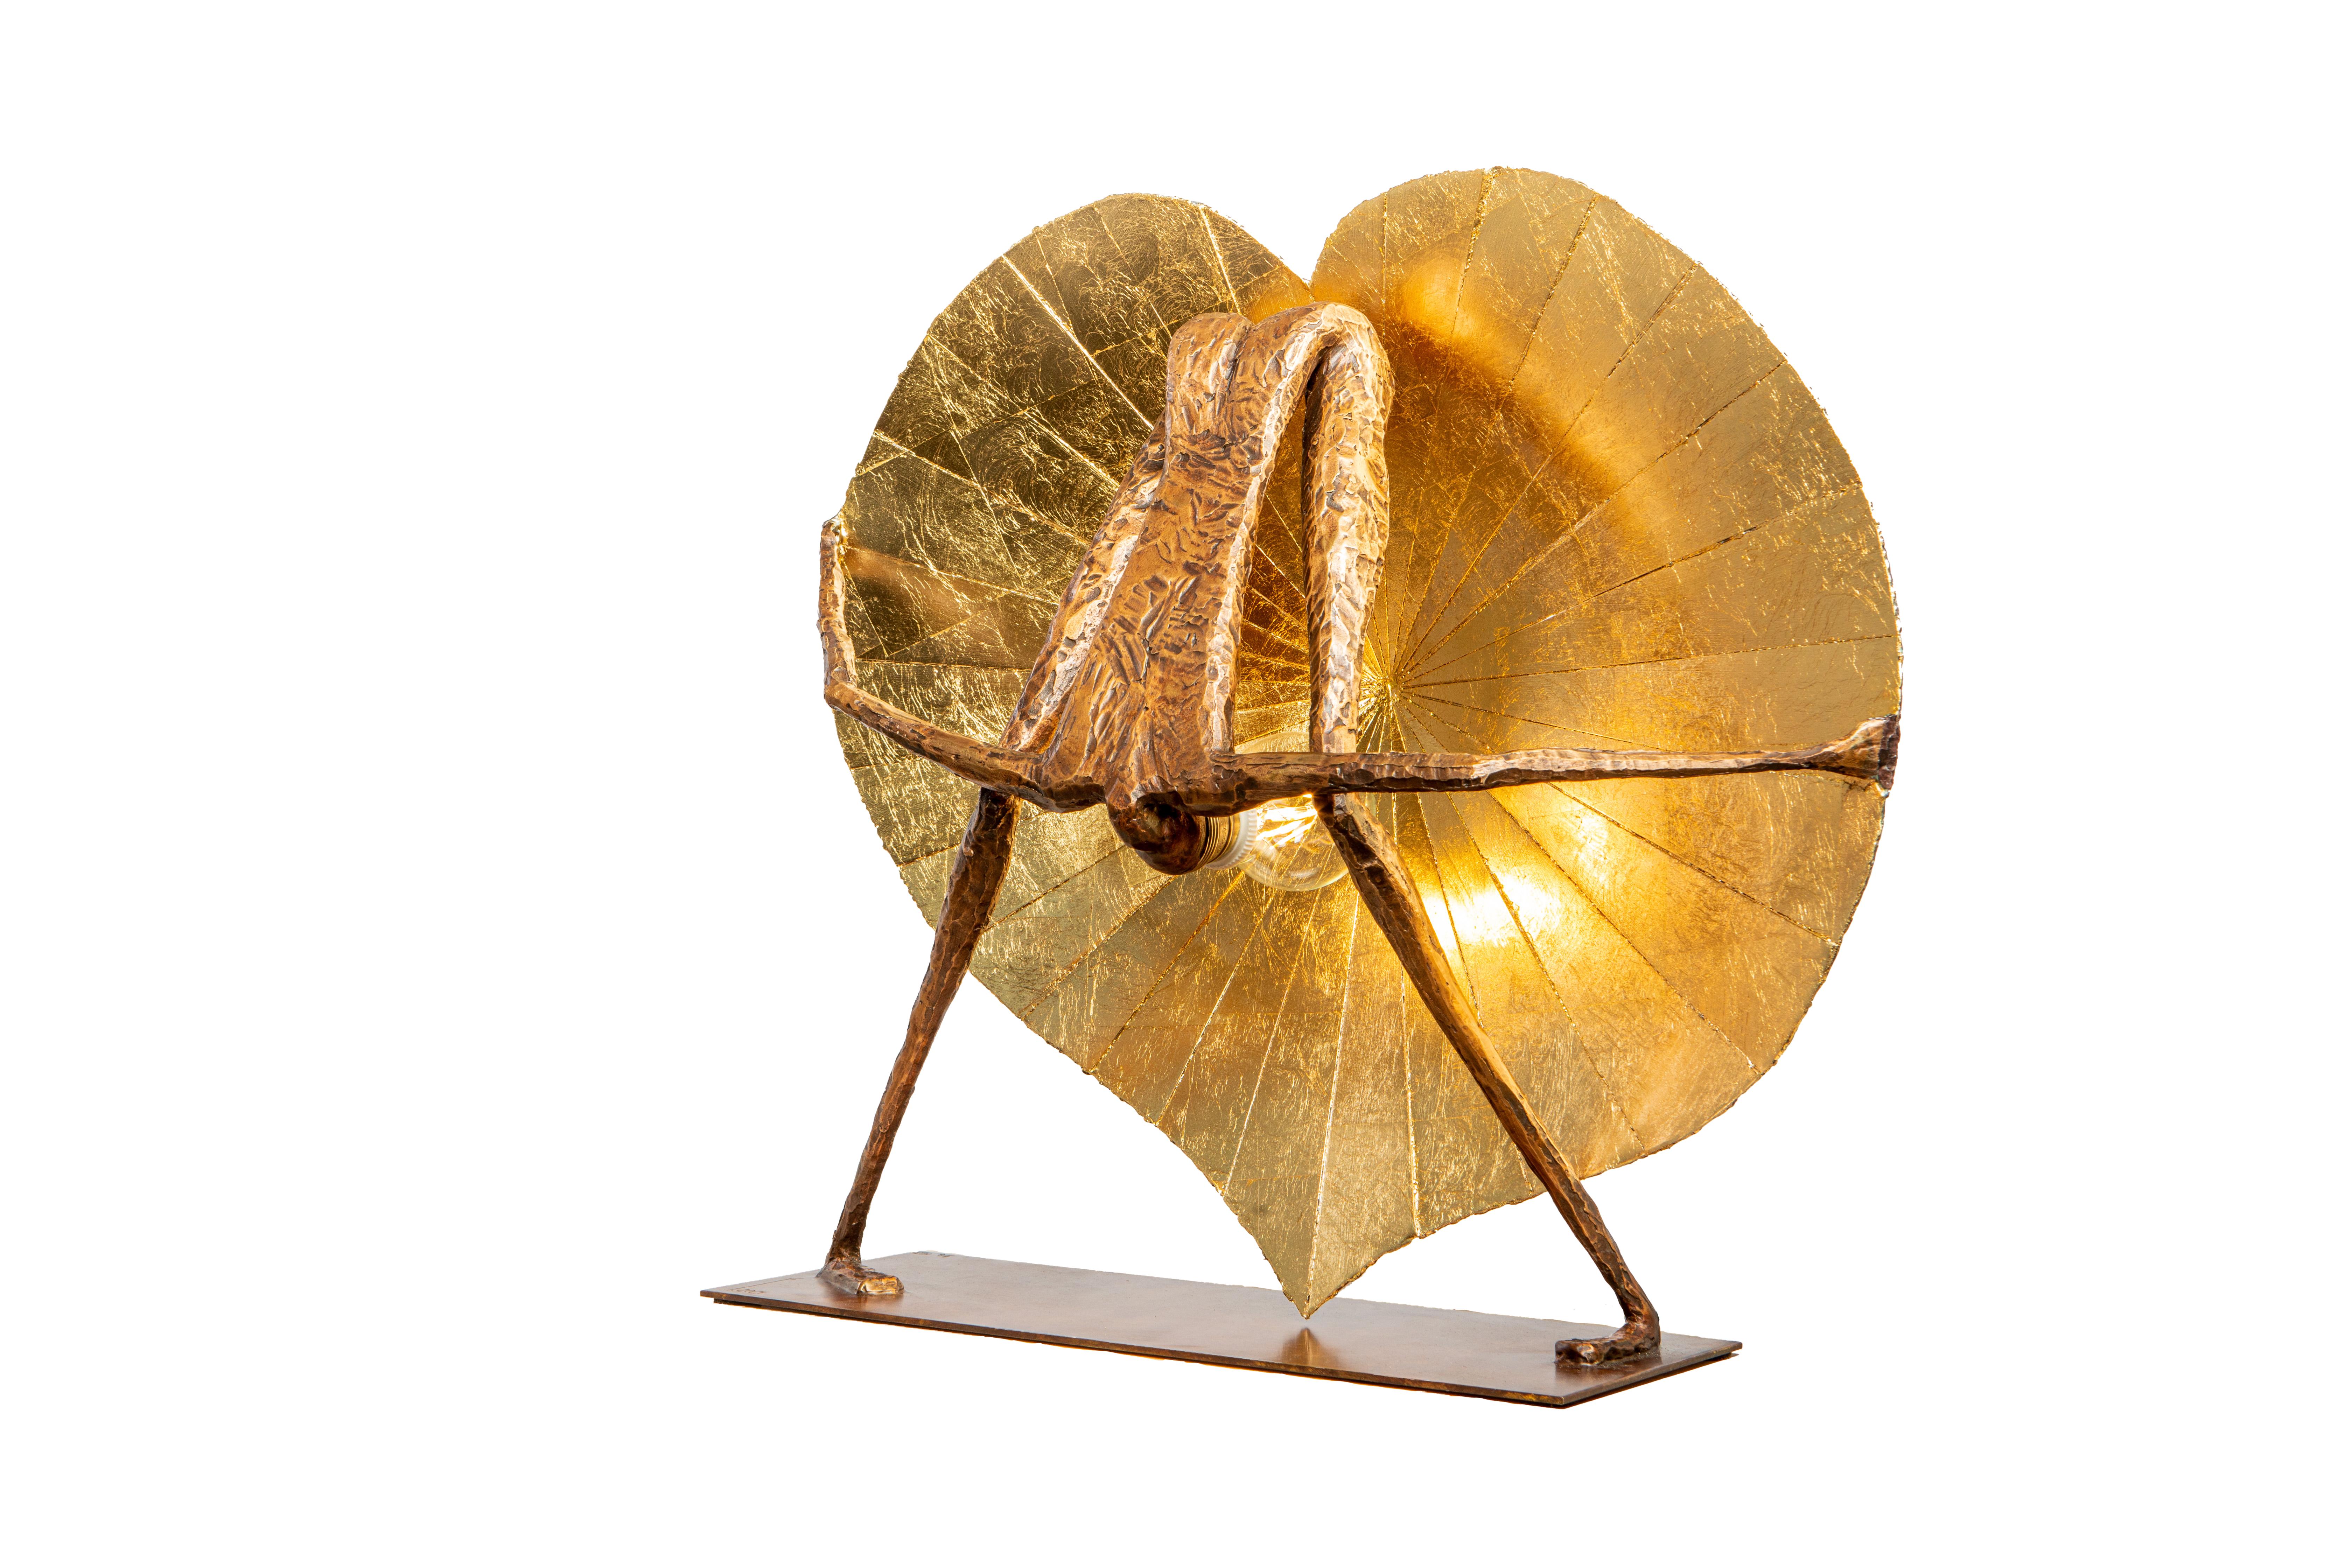 Patinated 21st Century Limited Edition Sculptural Table Lamp Écoute Ton Coeur by Fantôme For Sale